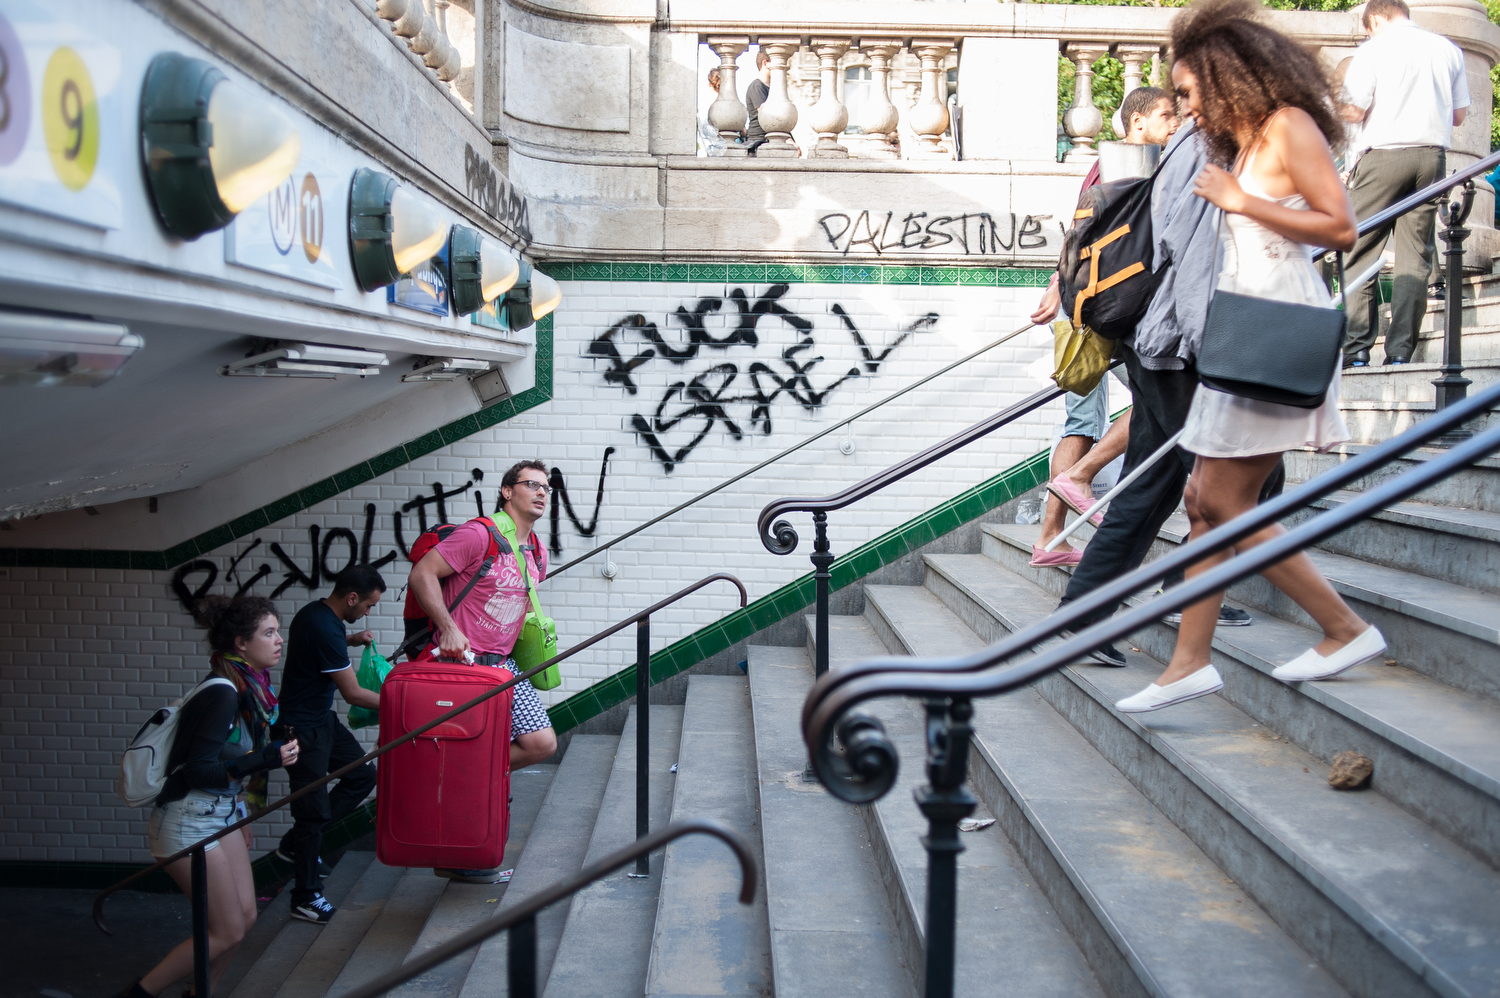  After 19h30, calm returned to the Place de la Republique and the metro, which had been vandalized, was reopened. Tourists carry their bags out of the metro station. 